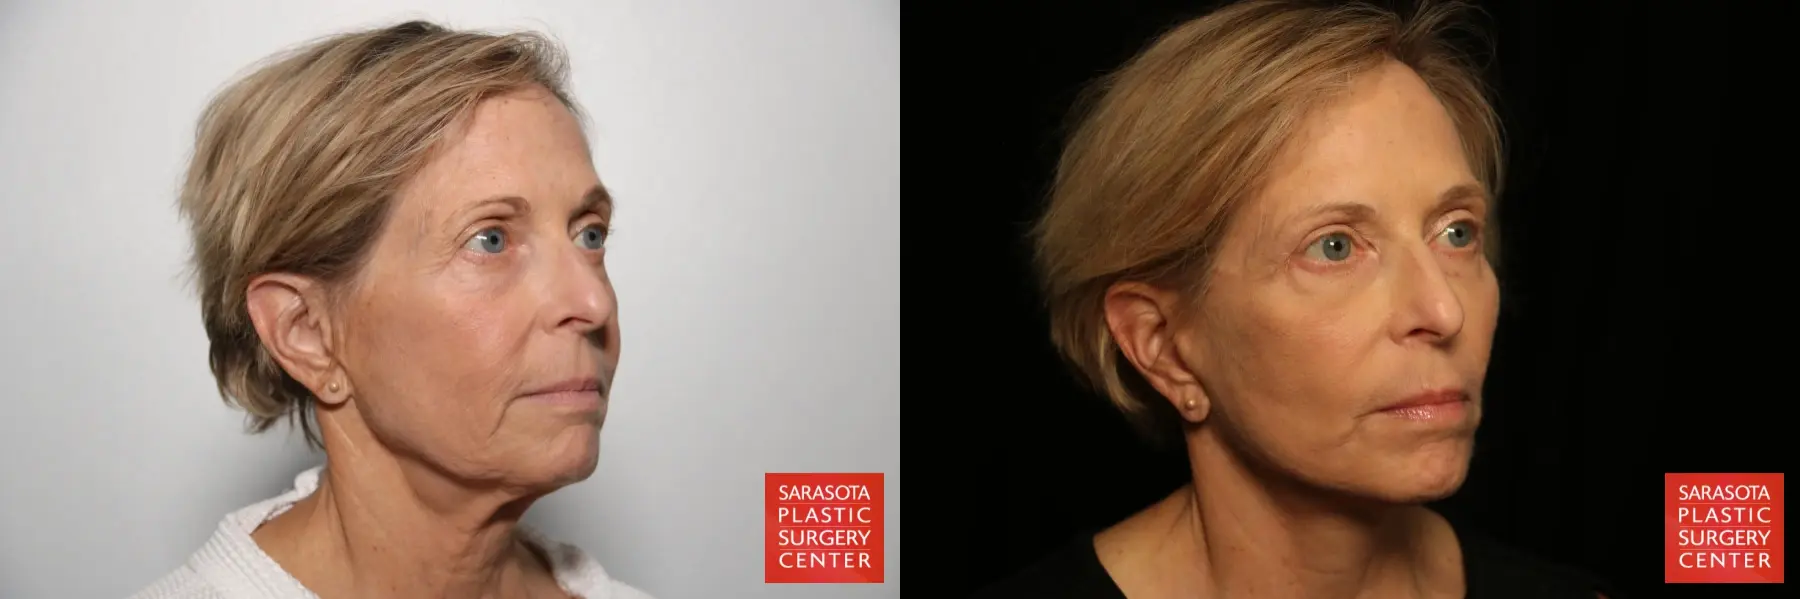 Facelift: Patient 44 - Before and After 2